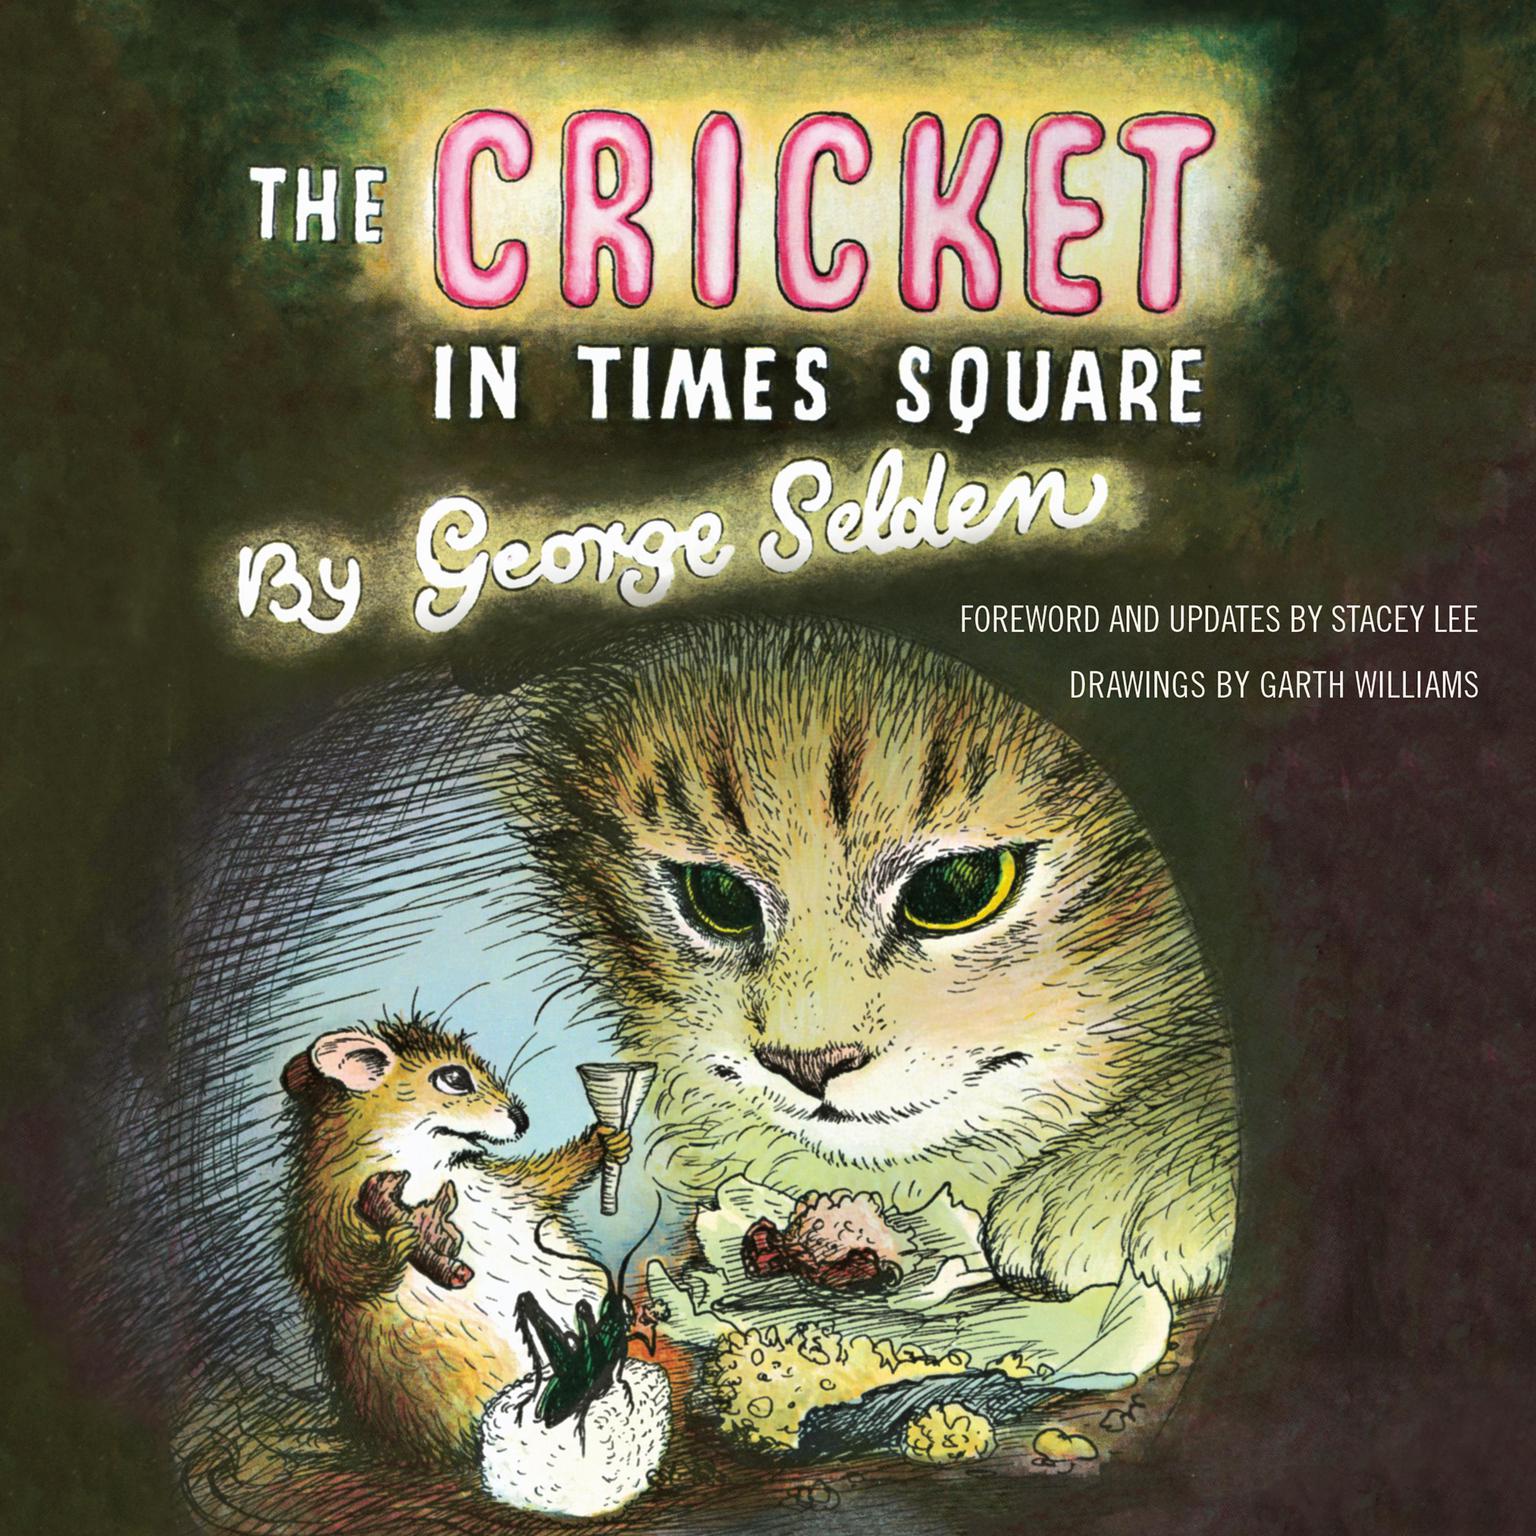 The Cricket in Times Square: Revised and updated edition with an afterword by Stacey Lee; read by Vikas Adam Audiobook, by George Selden